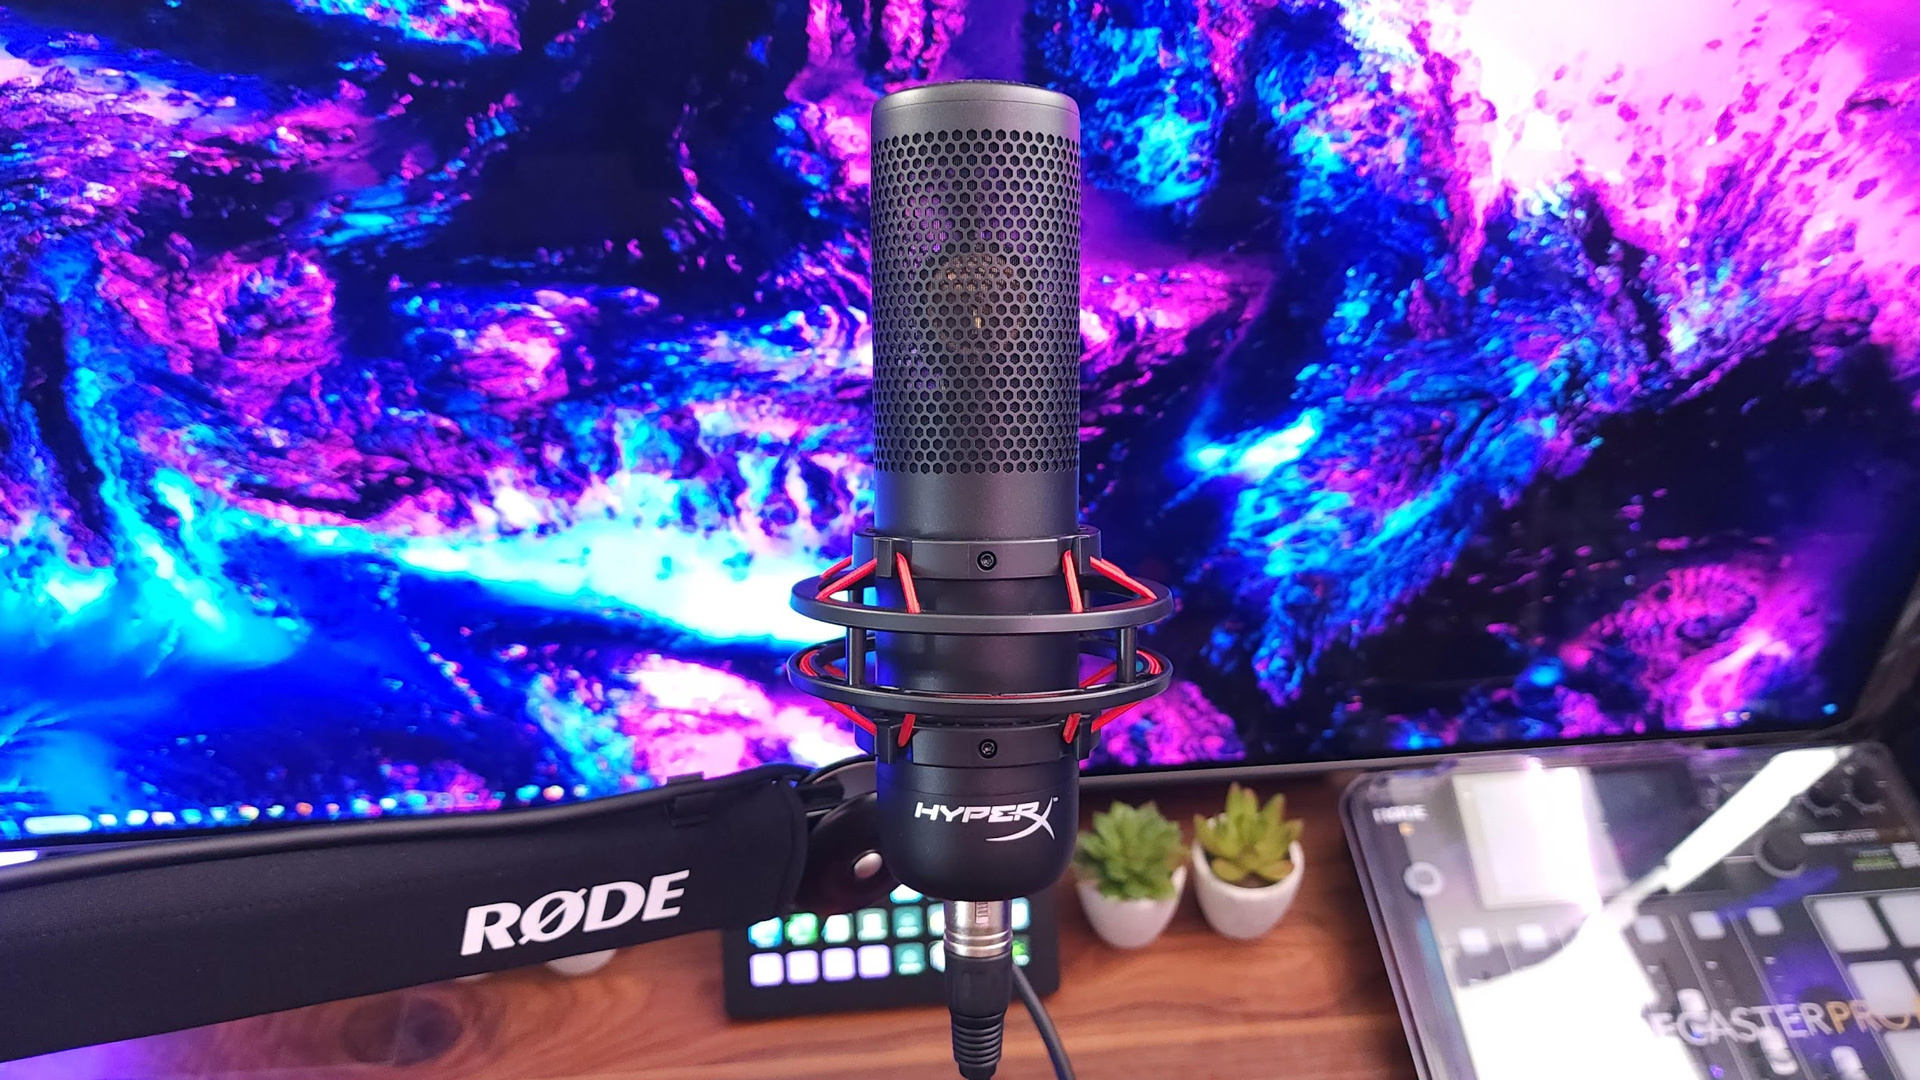 HyperX ProCast XLR Microphone Review: Good Sound But Too Expensive